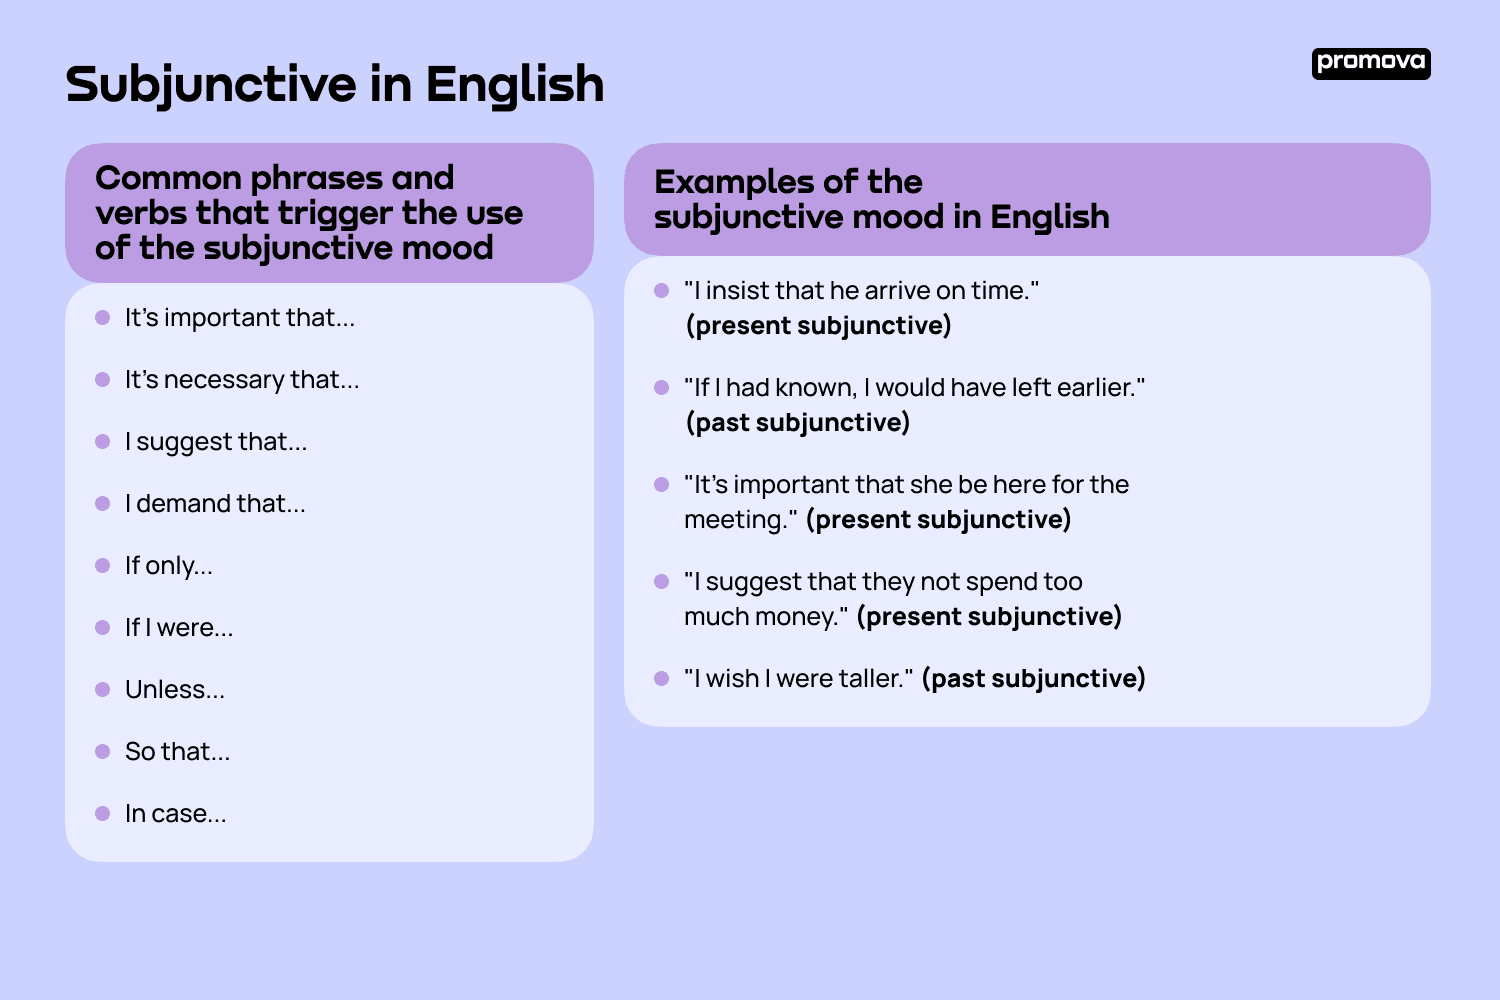 Examples of the subjunctive mood in English